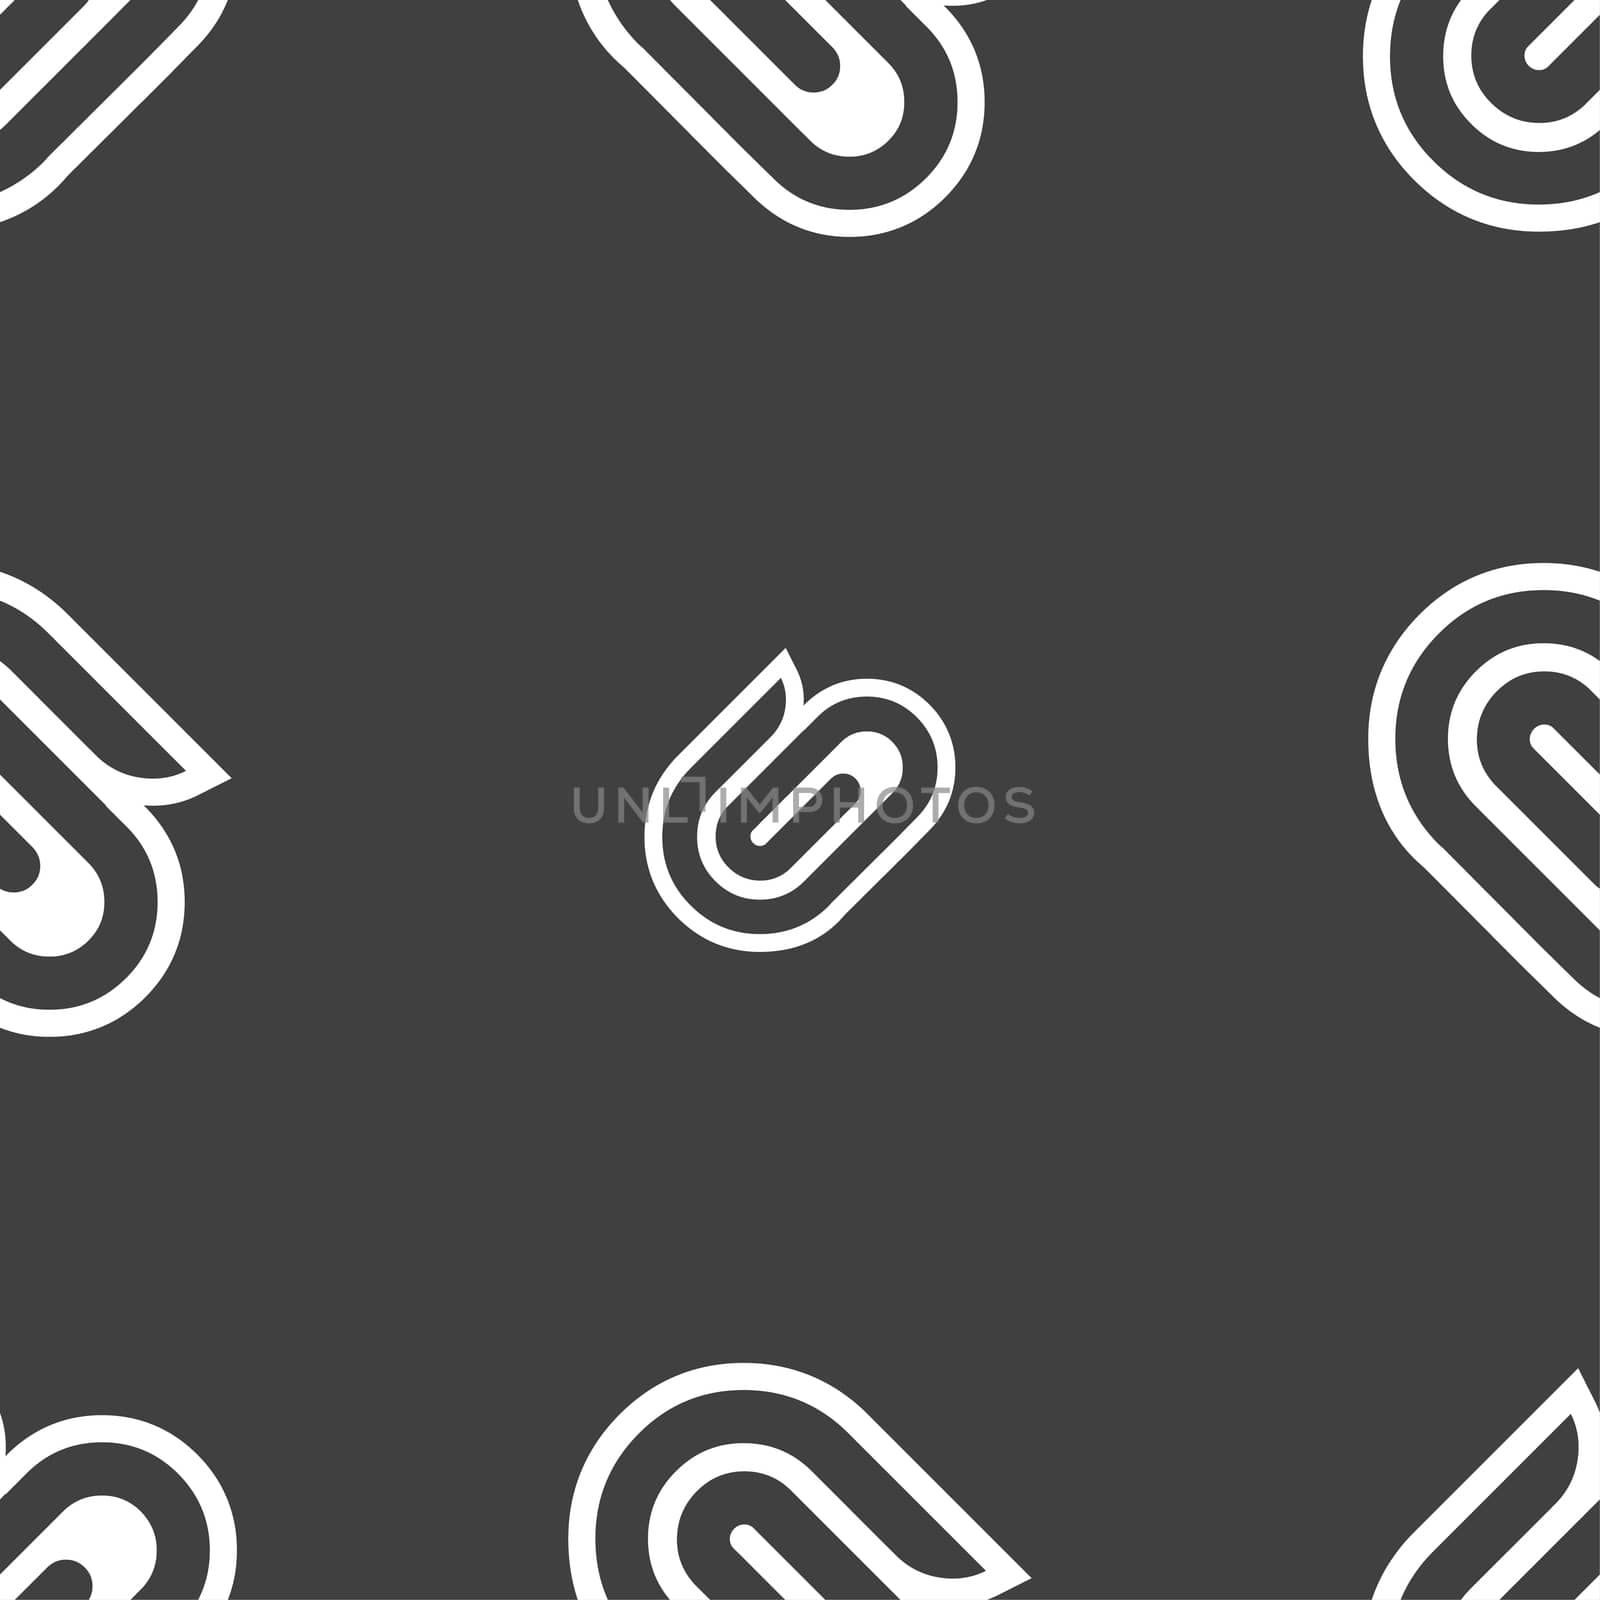 paper clip icon sign. Seamless pattern on a gray background. illustration